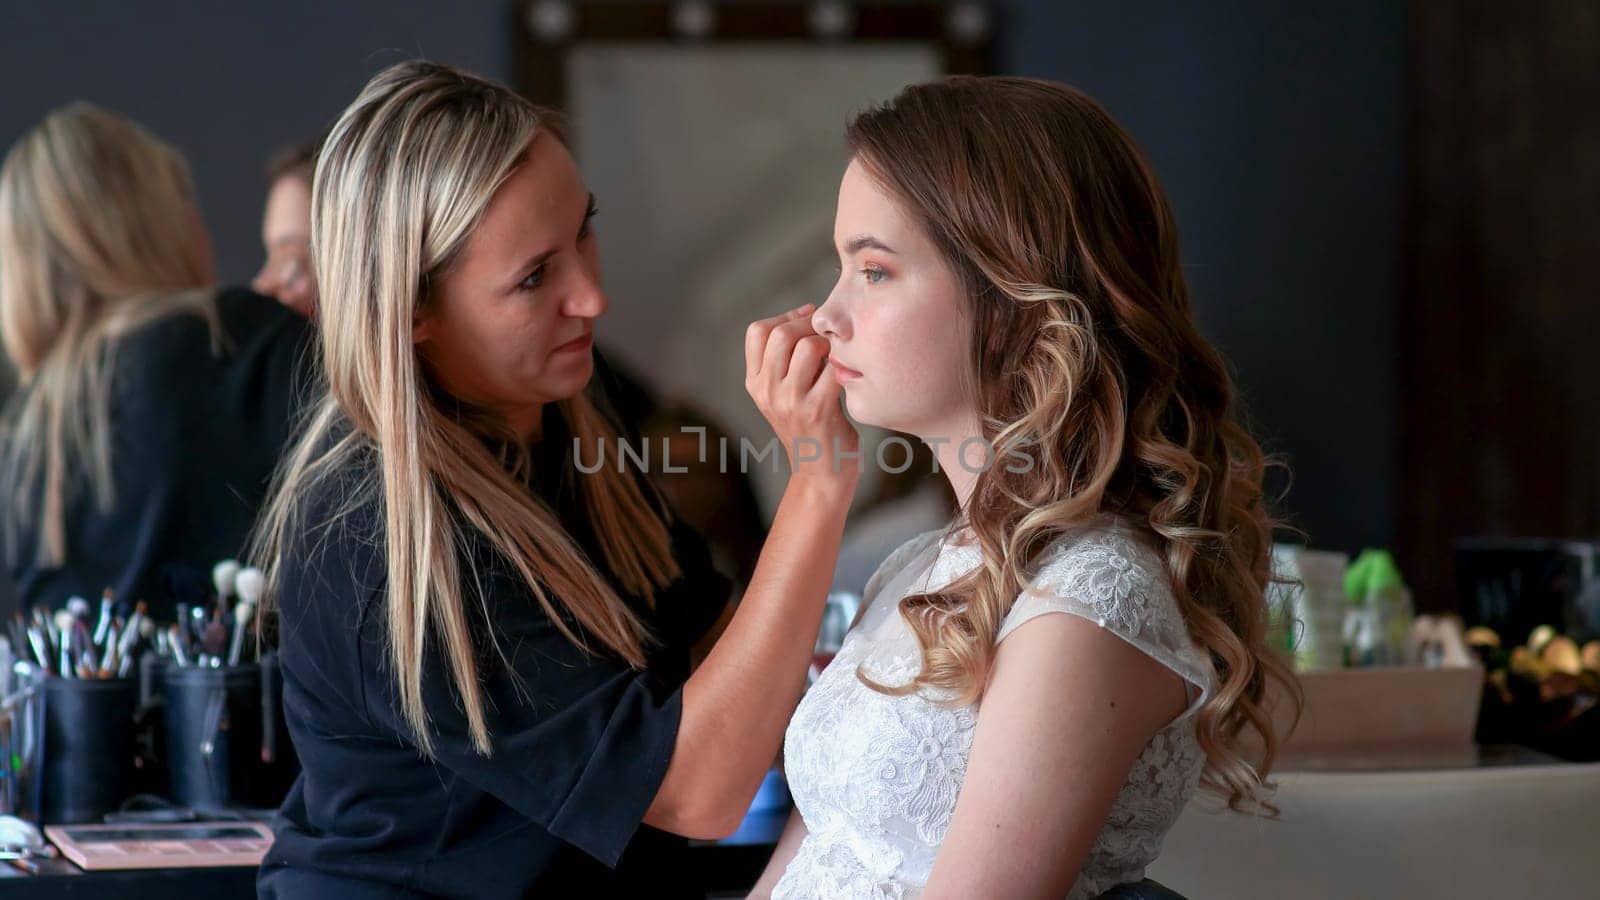 Makeup artist paints the eyes of a girl model.